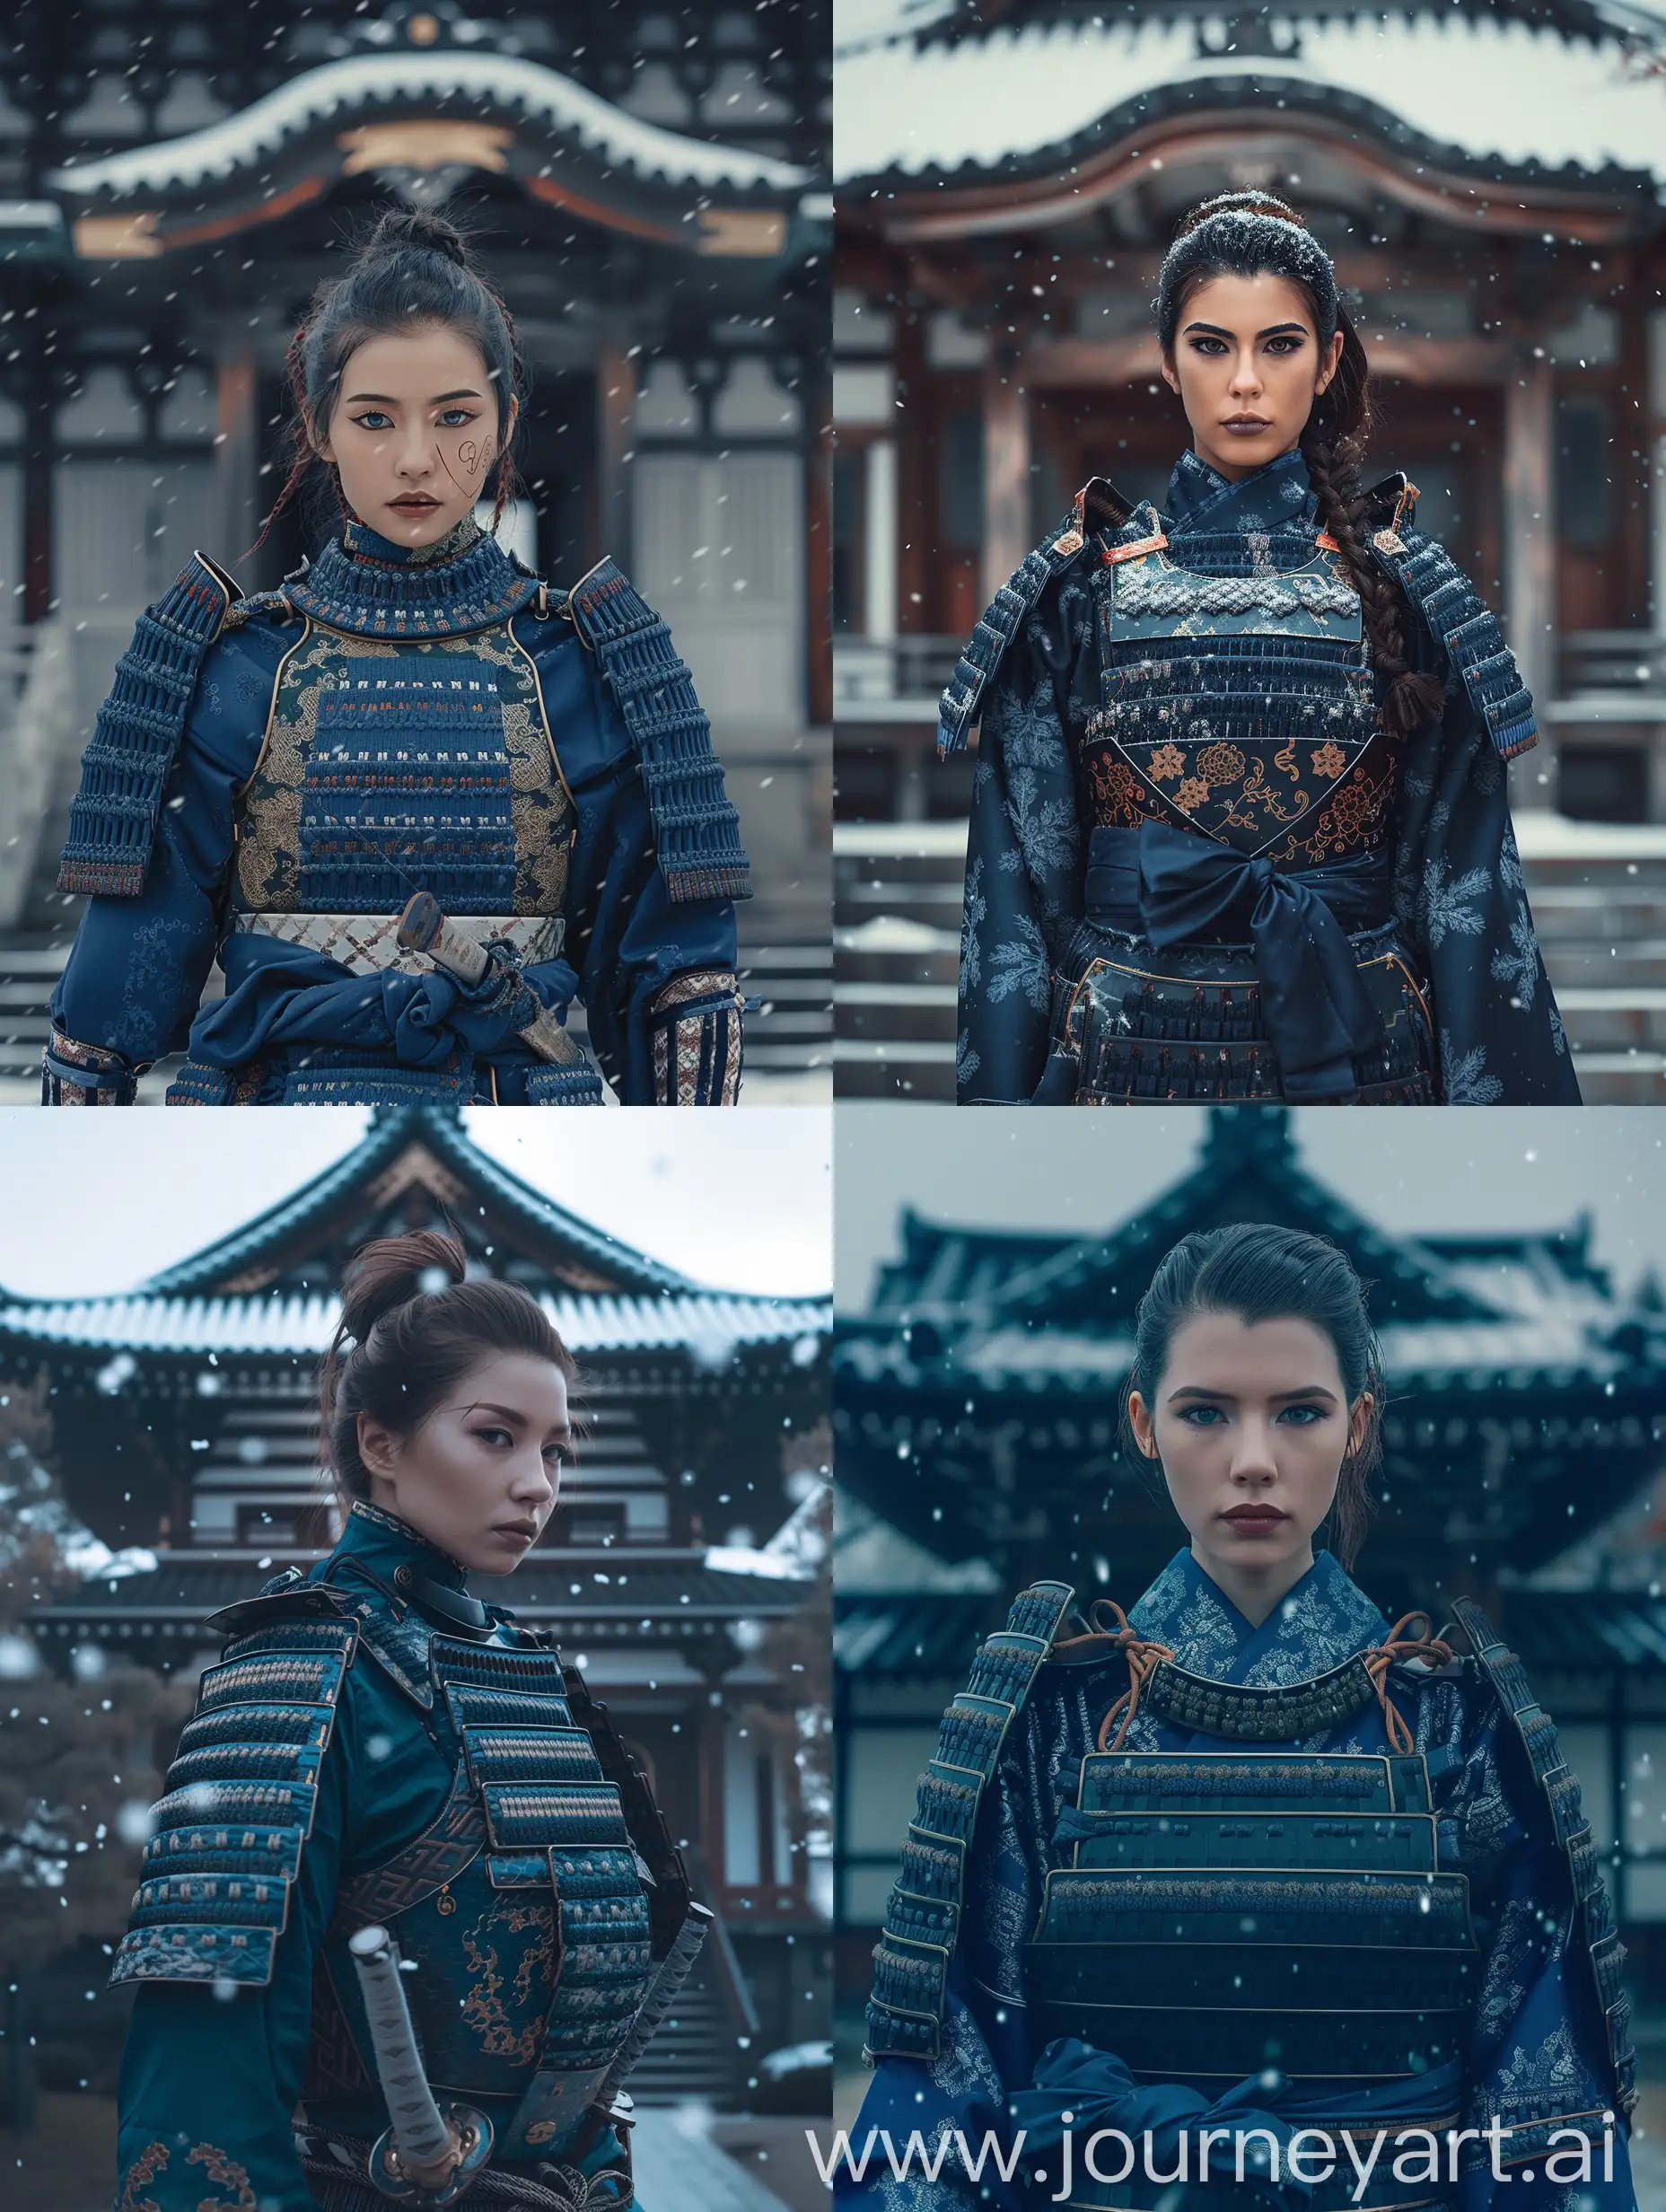 Character: A captivating and Beautiful Female Samurai Warrior adorned in a resplendent Blue ō-yoroi armor, radiating elegance and strength.
Environment: The majestic setting of a Japanese Temple, steeped in tradition and serenity.
Background: A Front View of a Symmetrical Japanese Temple, its intricate architecture providing a harmonious backdrop to the scene.
Style: An opulent Blue ō-yoroi Fashion Editorial, blending the timeless essence of the Samurai with contemporary flair.
Photography Type: Cinematic Fashion Editorial, capturing the essence of the Blue ō-yoroi Samurai Warrior in a visually compelling manner.
Theme: A Fashion Editorial Campaign celebrating the Blue ō-yoroi Samurai Warrior, showcasing the fusion of tradition and modernity.
Visual Filters: Enhanced with a Fashion Film Look-Up Table (LUT), adding depth and richness to the visual narrative.
Camera Effects: Enriched with subtle Camera Blur and Camera Haze effects, enhancing the cinematic quality of the imagery.
Time: Set during a tranquil Evening with gentle snowfall, imbuing the scene with a serene and enchanting ambiance.
Resolution: Captured in High resolution, ensuring every intricate detail is meticulously preserved.
Key Element: The Blue ō-yoroi technical textile, a focal point of the ensemble, adorned with exquisite craftsmanship and detailing.
Details: Rich and intricate details adorn the technical textile of the Blue ō-yoroi armor, showcasing the mastery of the artisans who crafted it, and adding depth to the character's persona and the overall visual narrative.